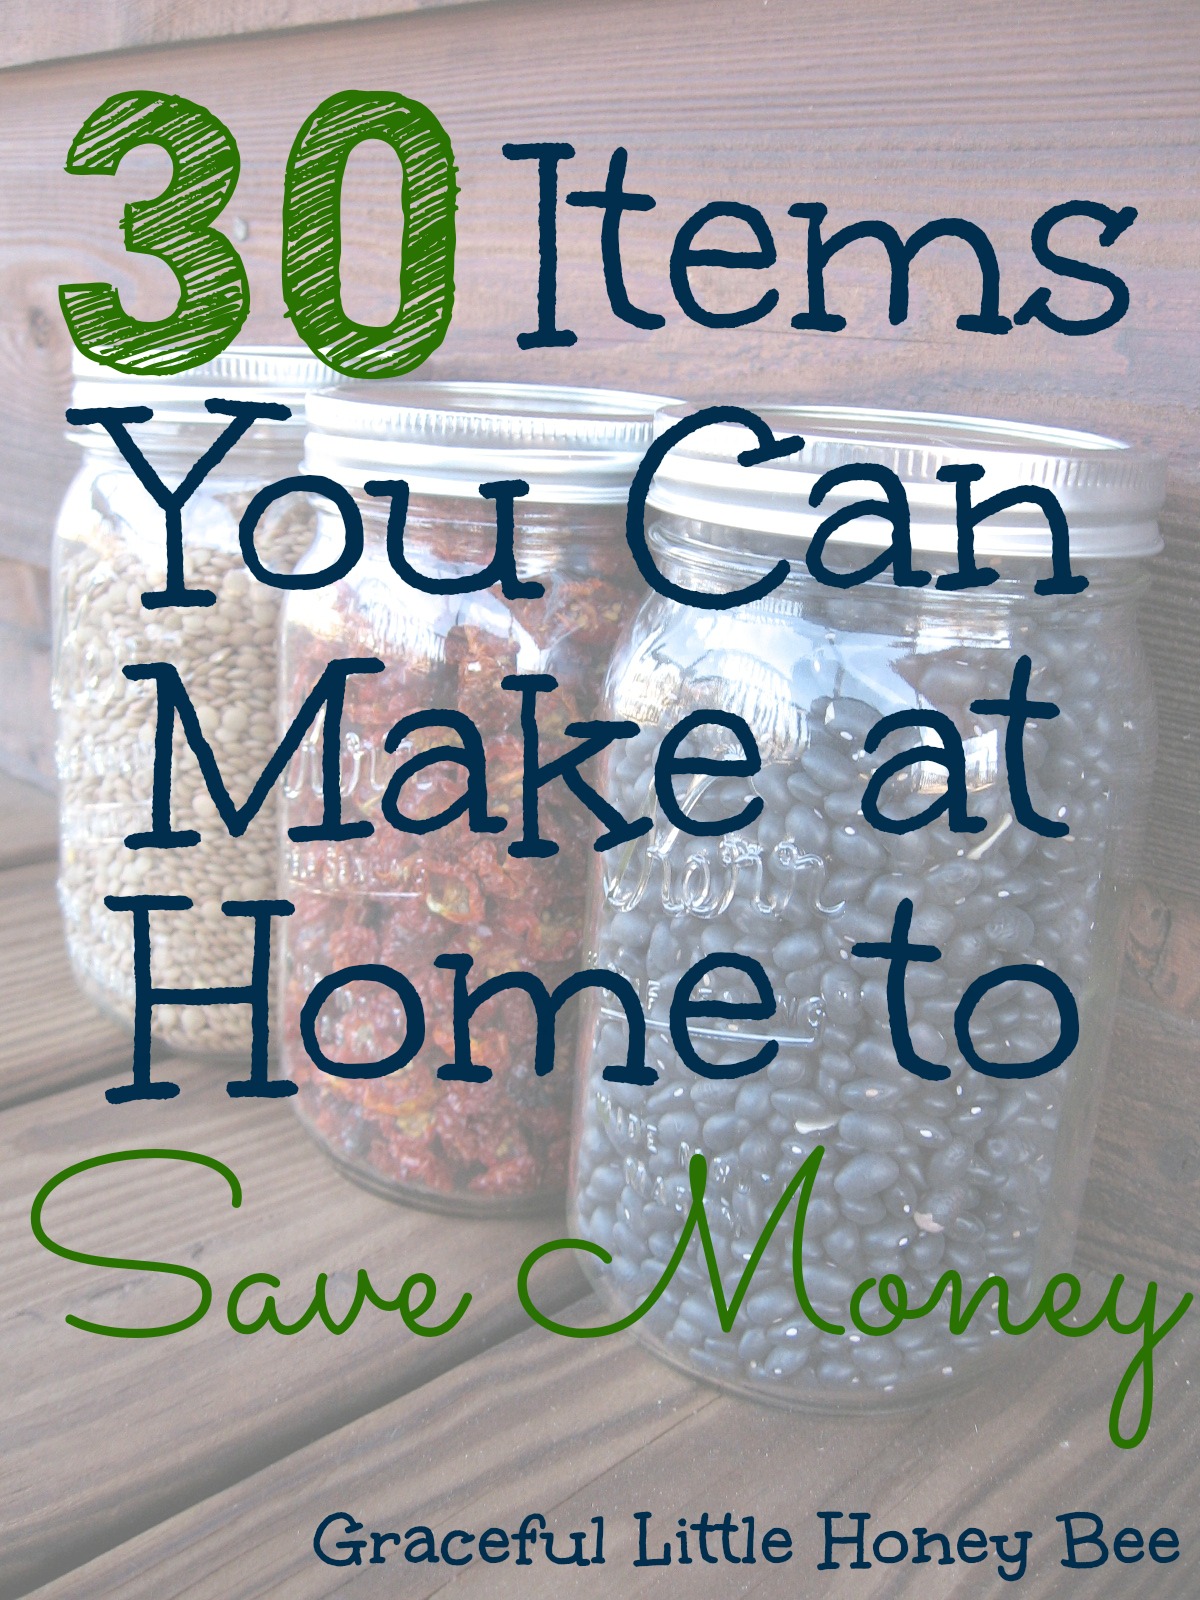 30 Items You Can Make at Home to Save Money